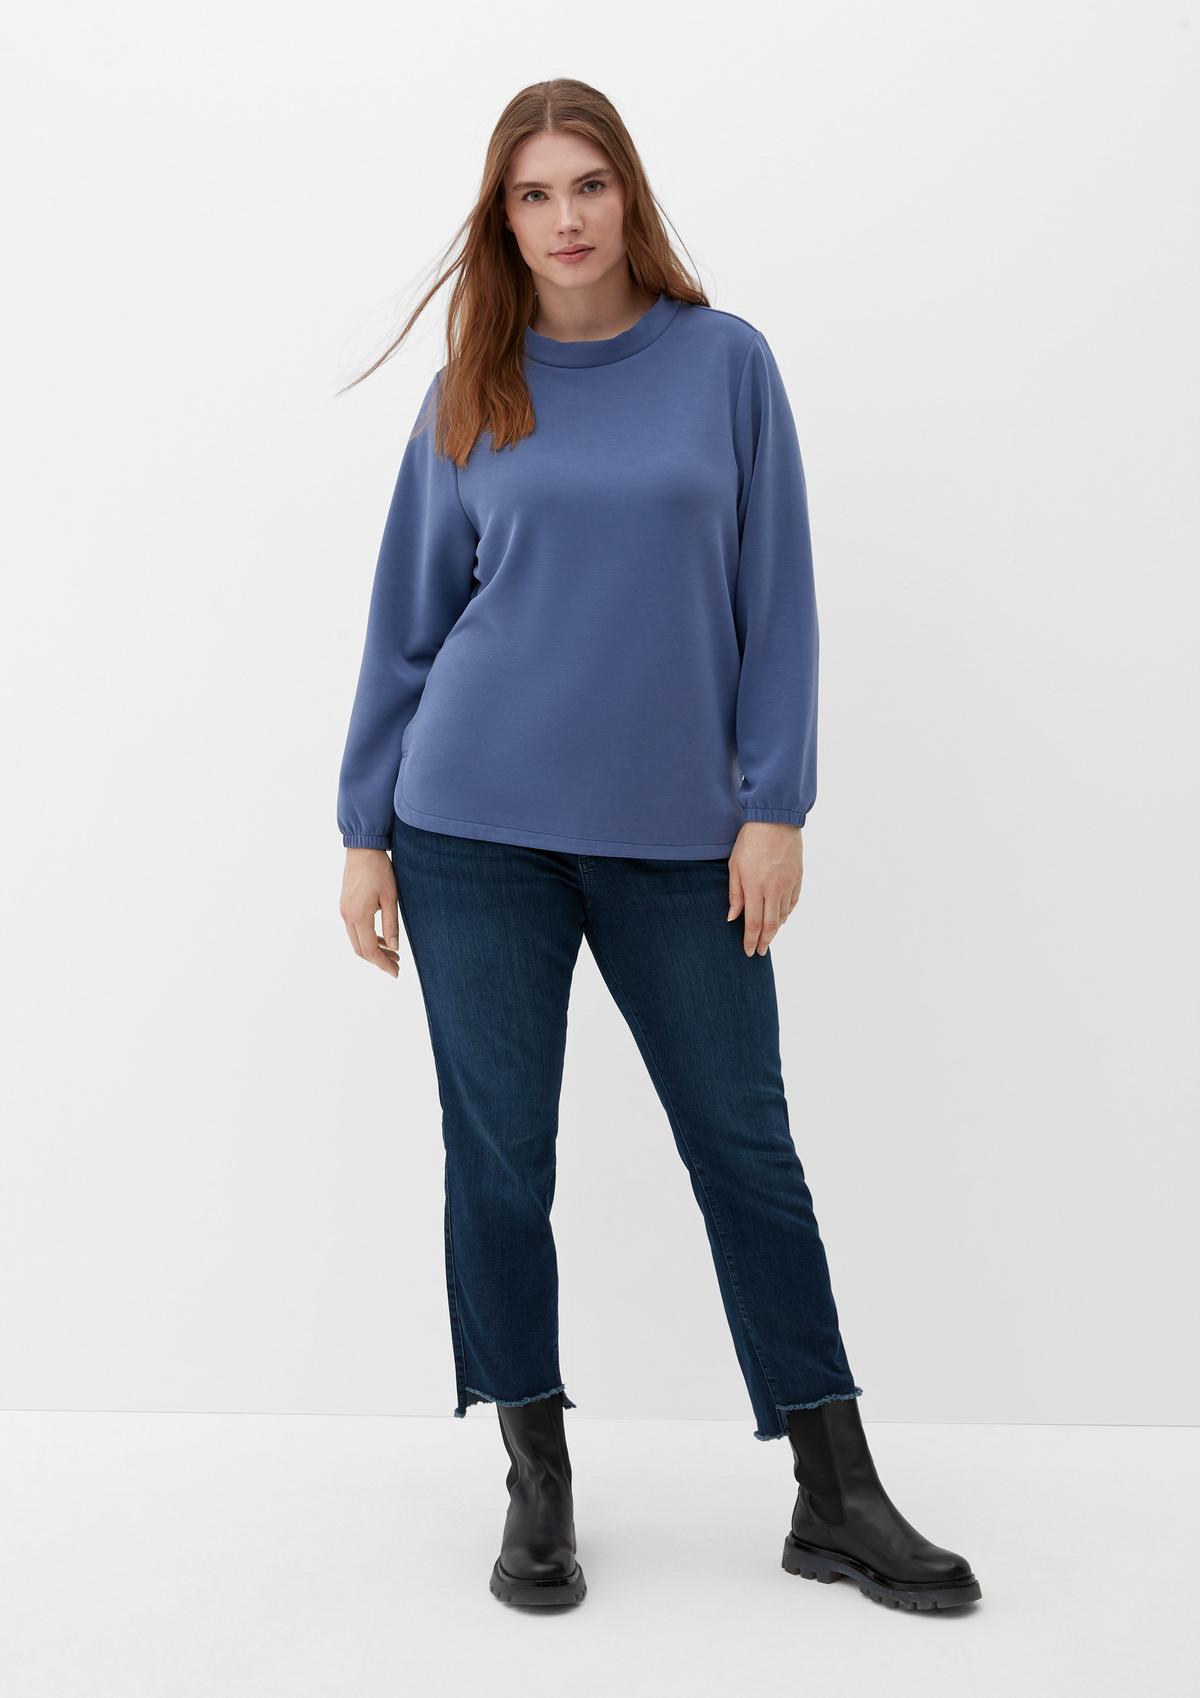 s.Oliver Sweatshirt with a stand-up collar